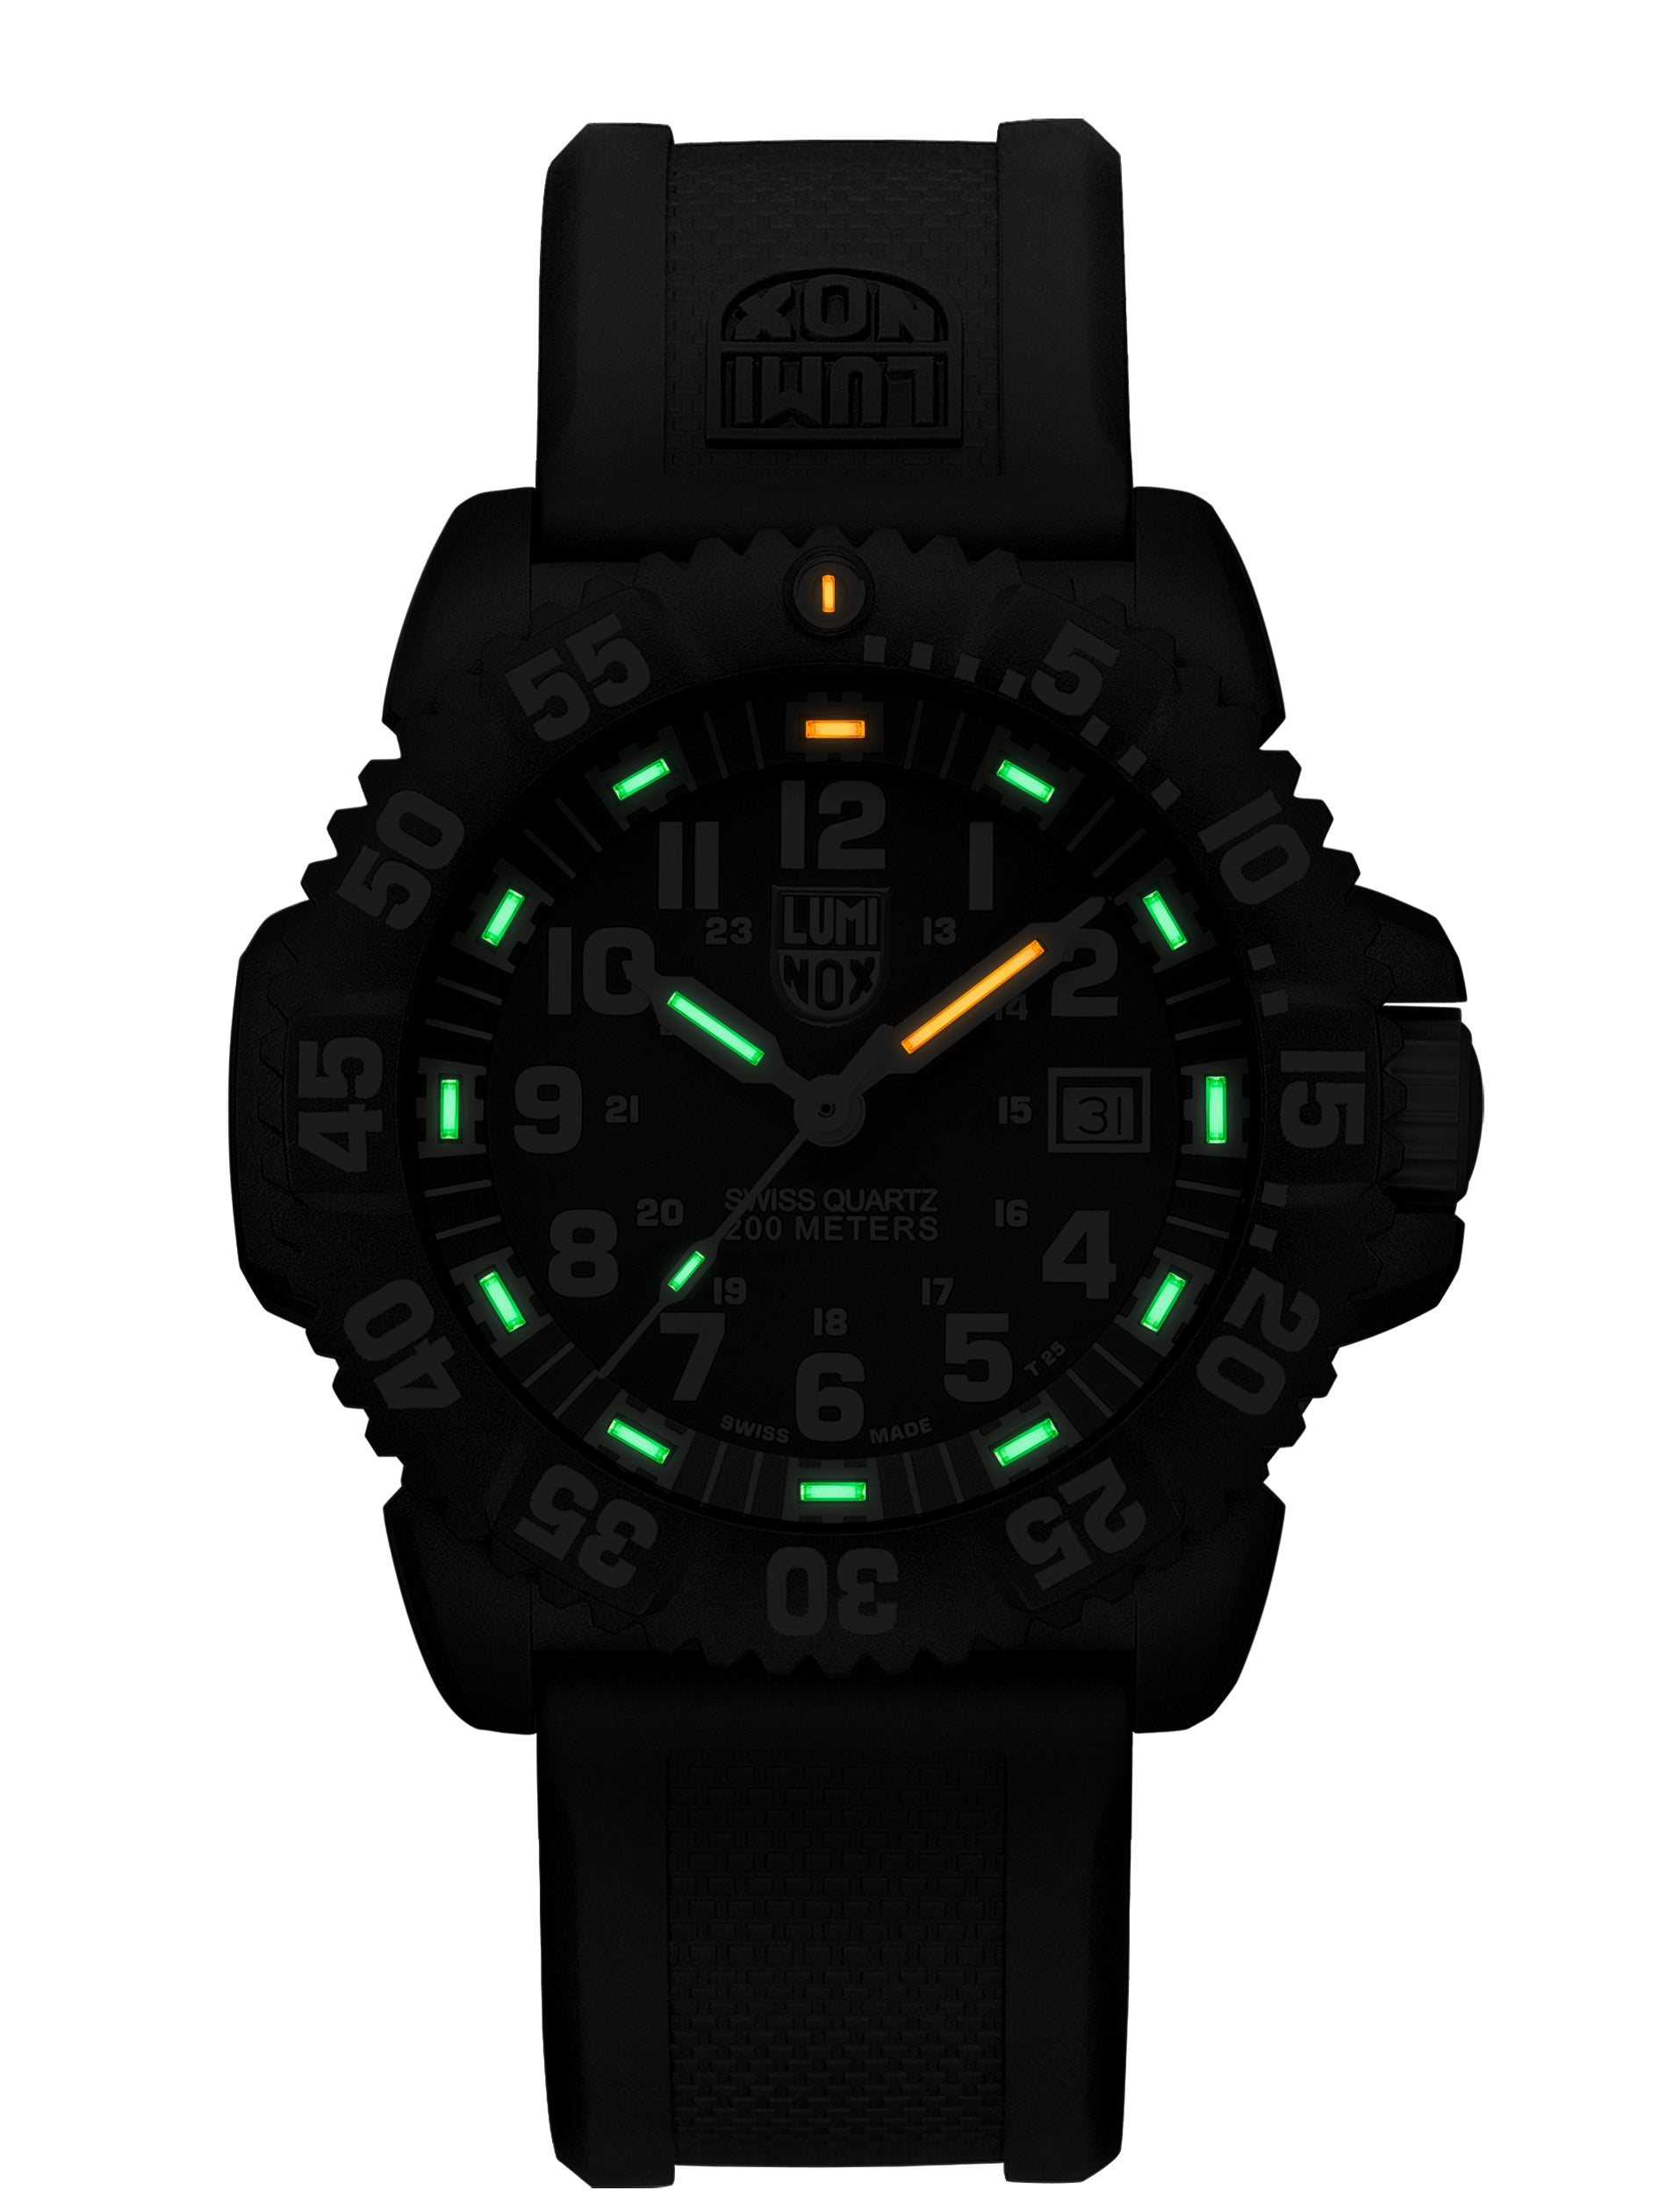 Navy SEAL Colormark XS.3051